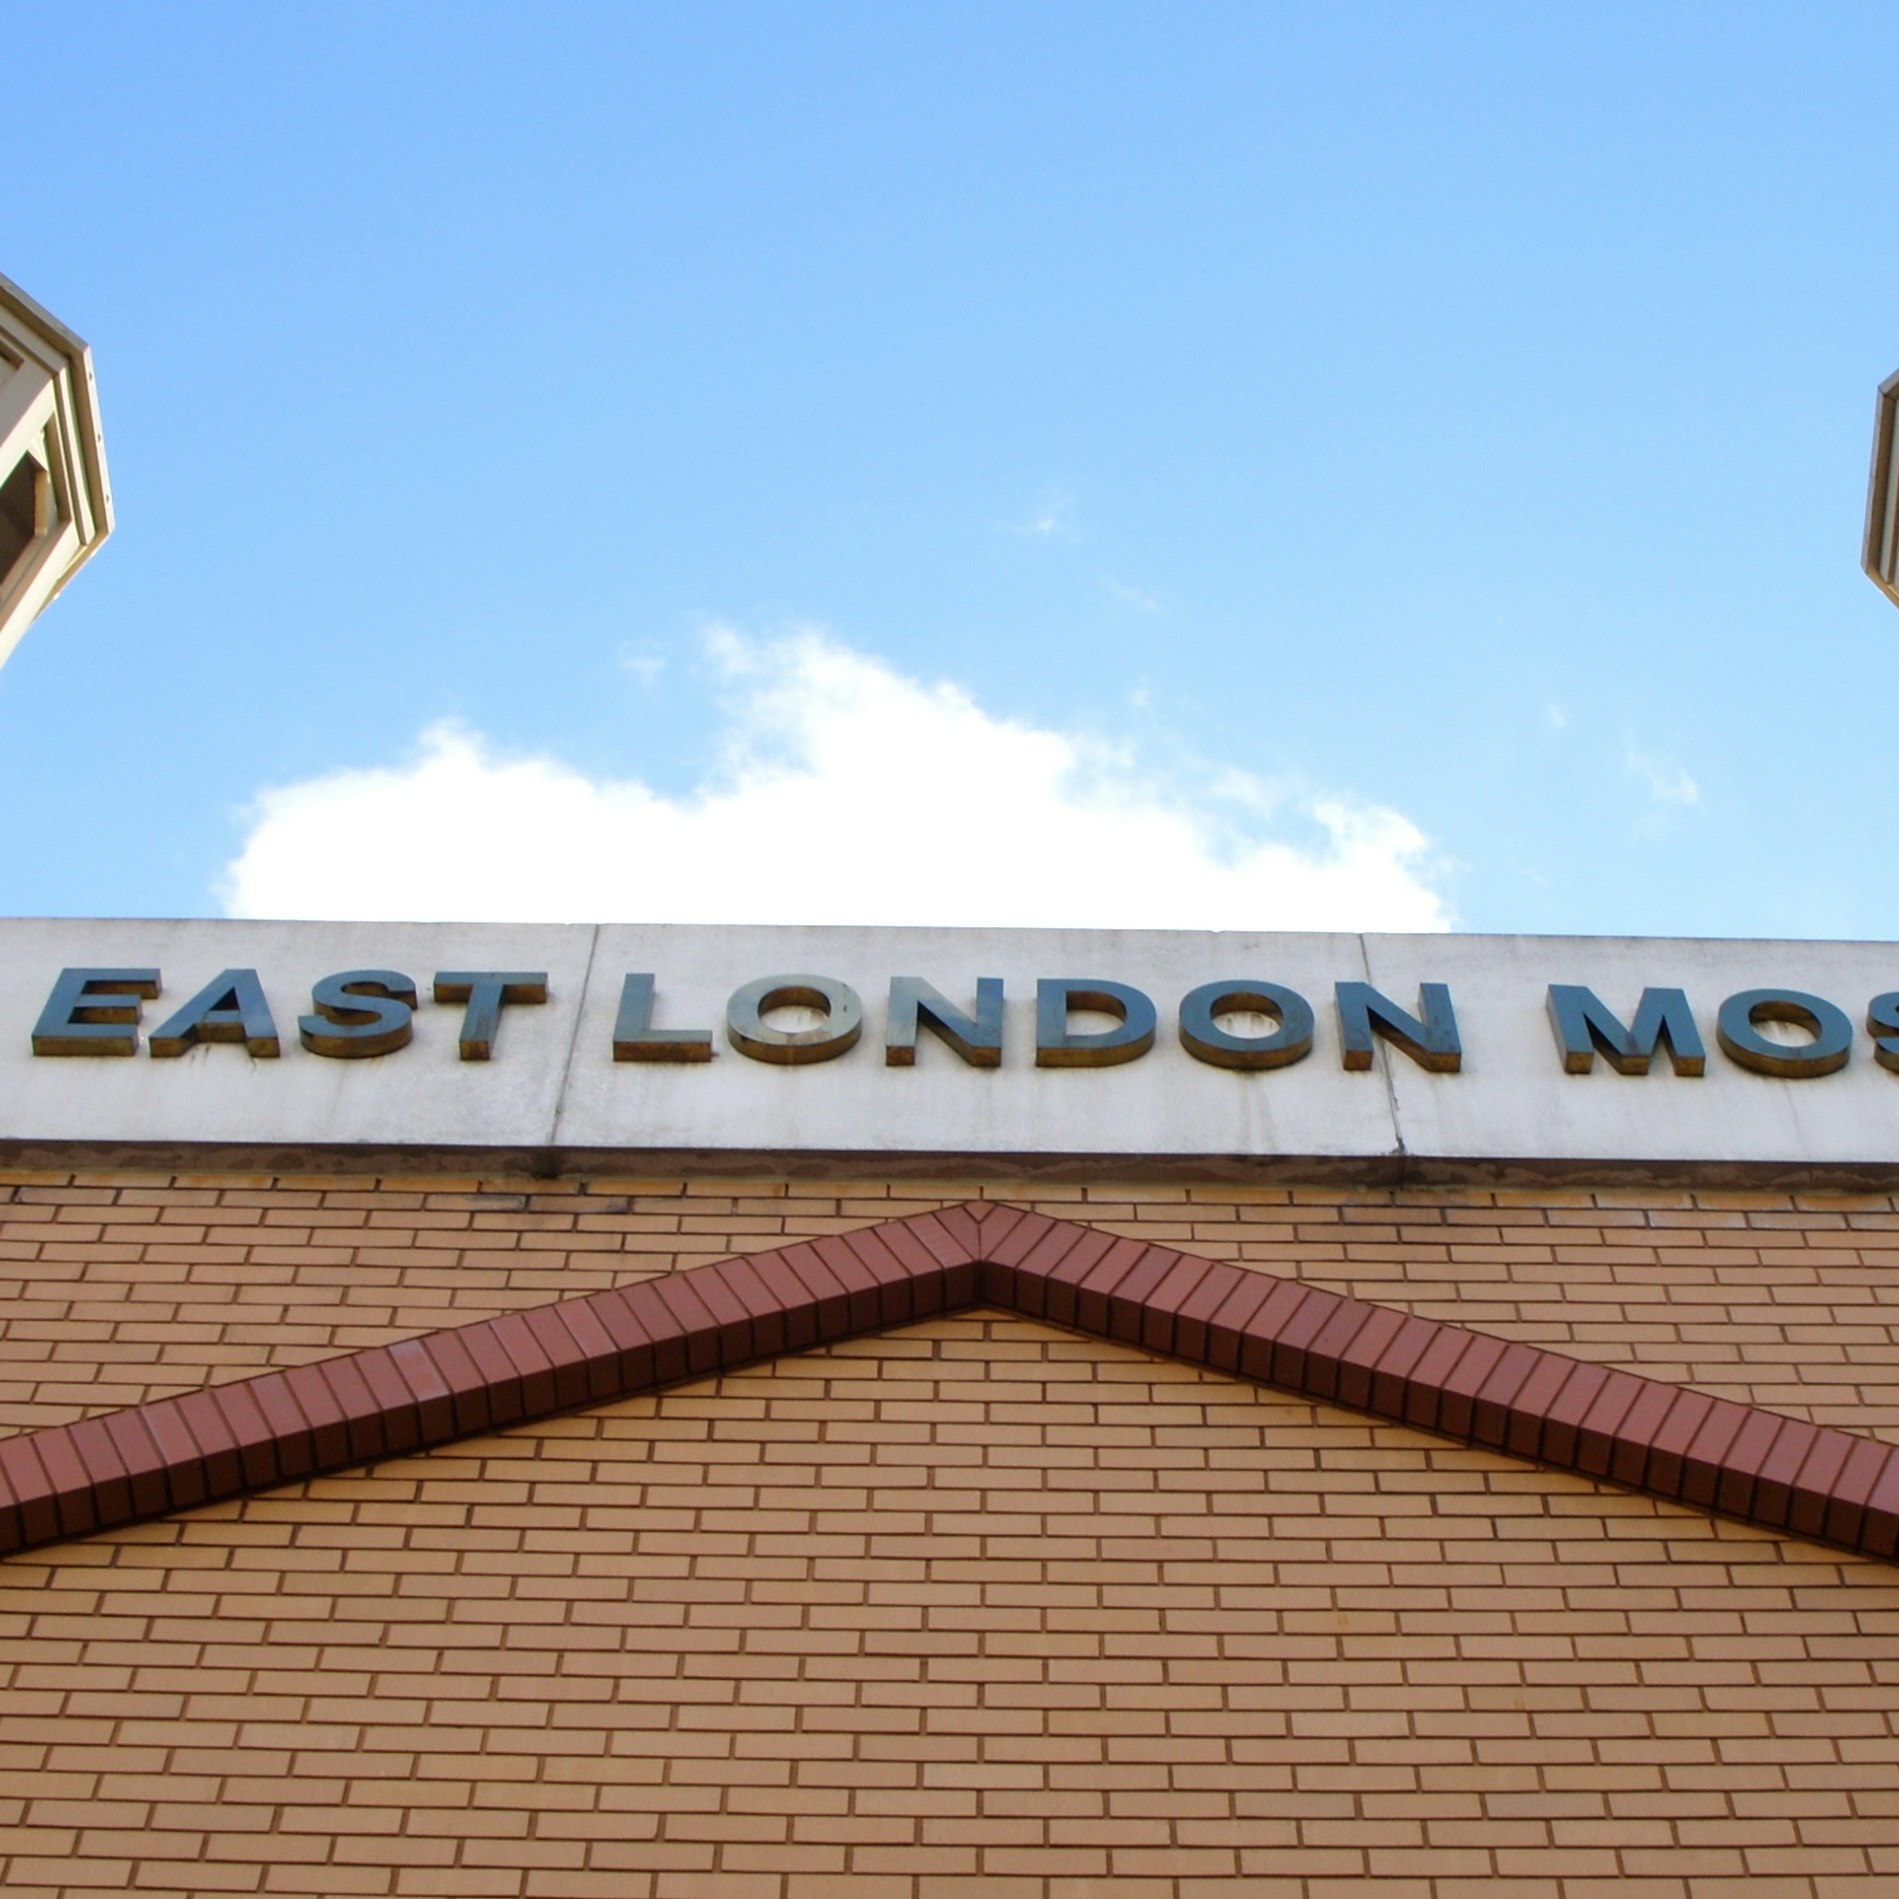 East london mosque.; Shutterstock ID 8734069; Your name (First / Last): Josh Vogel; GL account no.: 56530; Netsuite department name: Online Design; Full Product or Project name including edition: Digital Content/Sights